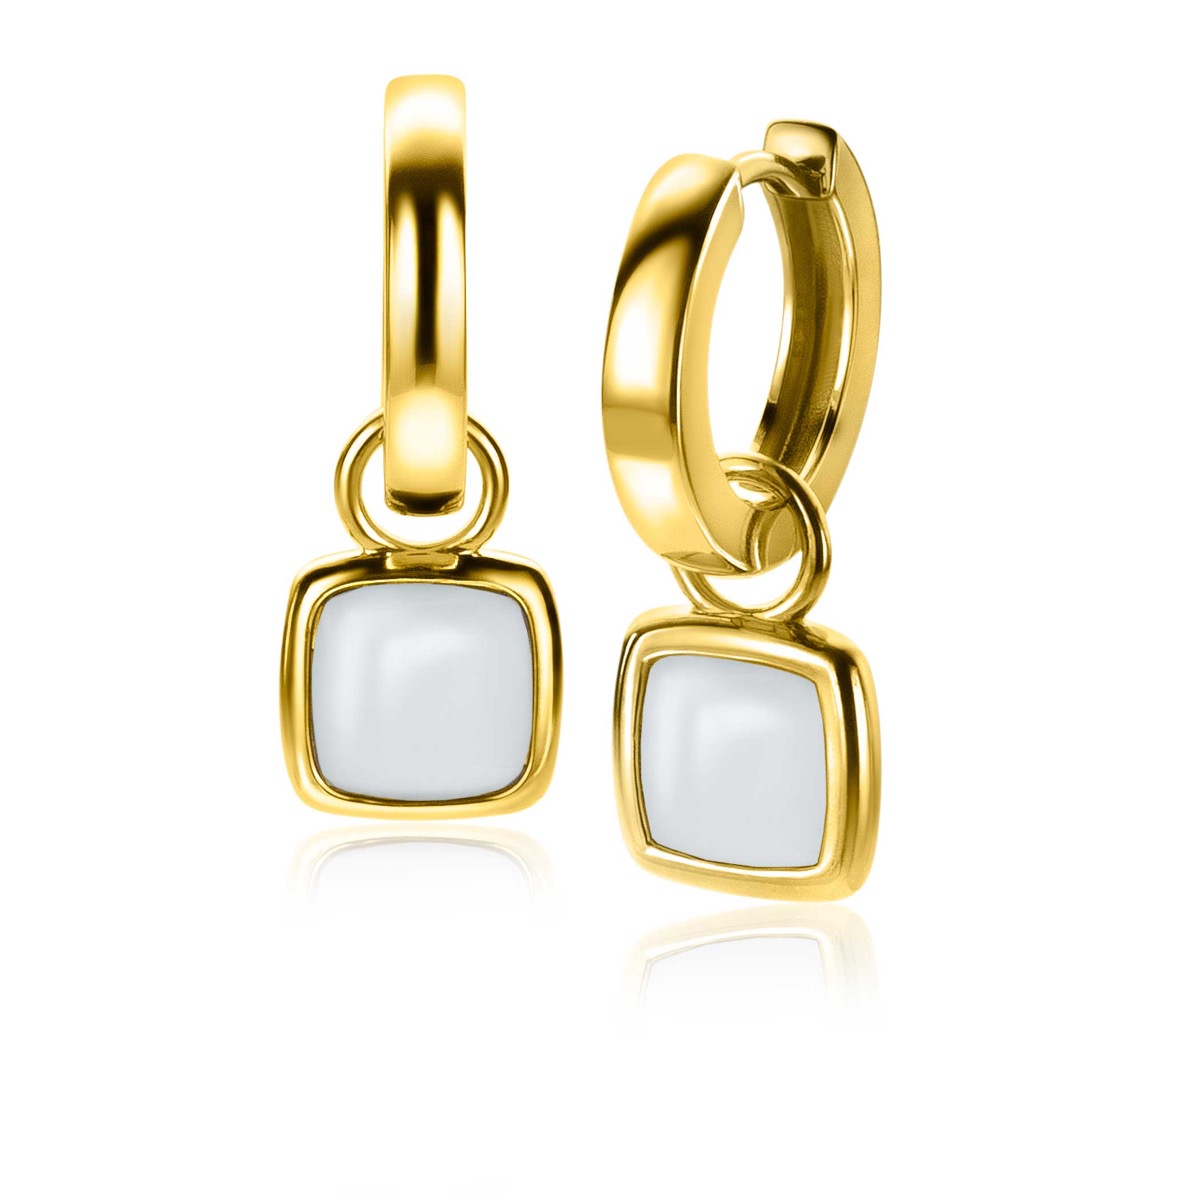 10mm ZINZI Gold Plated Sterling Silver Earrings Pendants Square Two-sided Mint Green and White Onyx ZICH2308 (excl. hoop earrings)